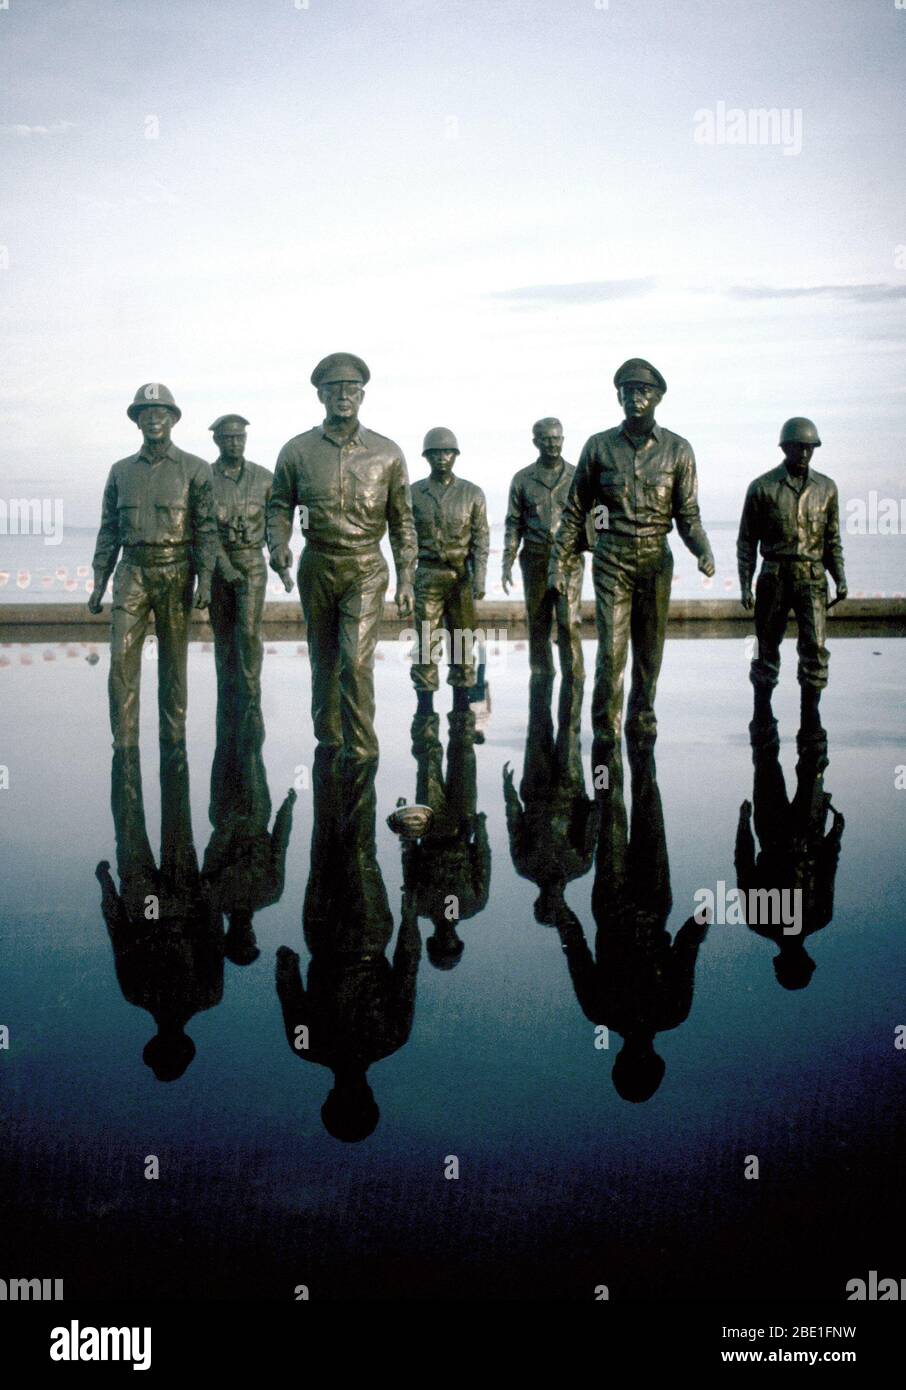 Silhouetted view of the life-like monument commemorating GEN Douglas MacArthur's return here on Oct. 20, 1994.  MacArthur's return fulfilled his earlier and oft-quoted promise of 'I shall return'. Stock Photo